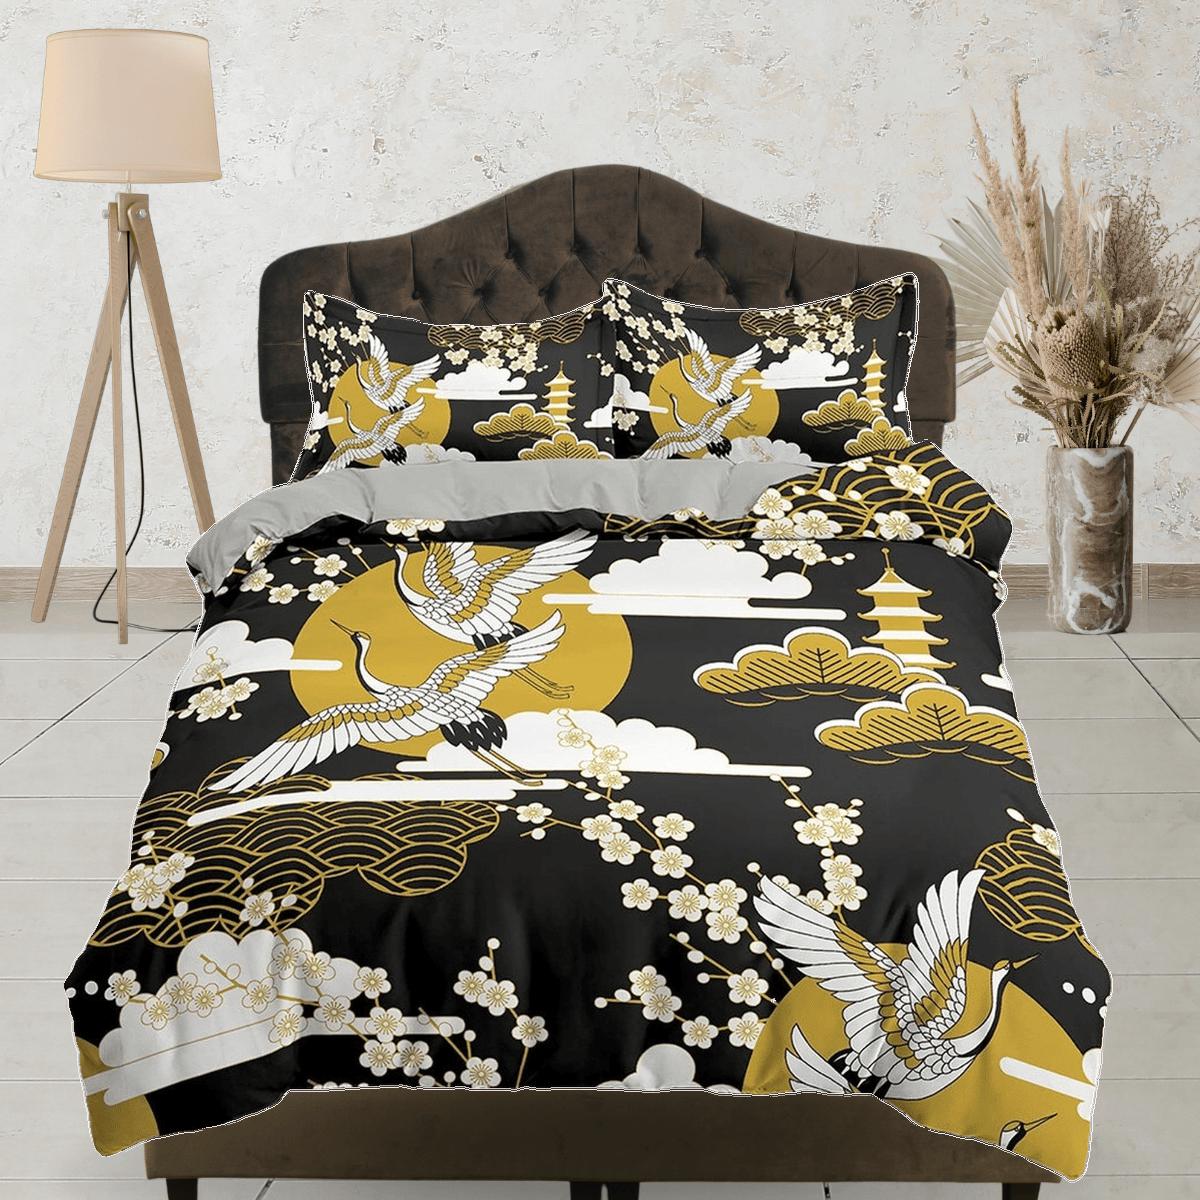 daintyduvet Black oriental bedding, crane bird and cherry blossom prints on Japanese style duvet cover set for king, queen, full, twin, single bed